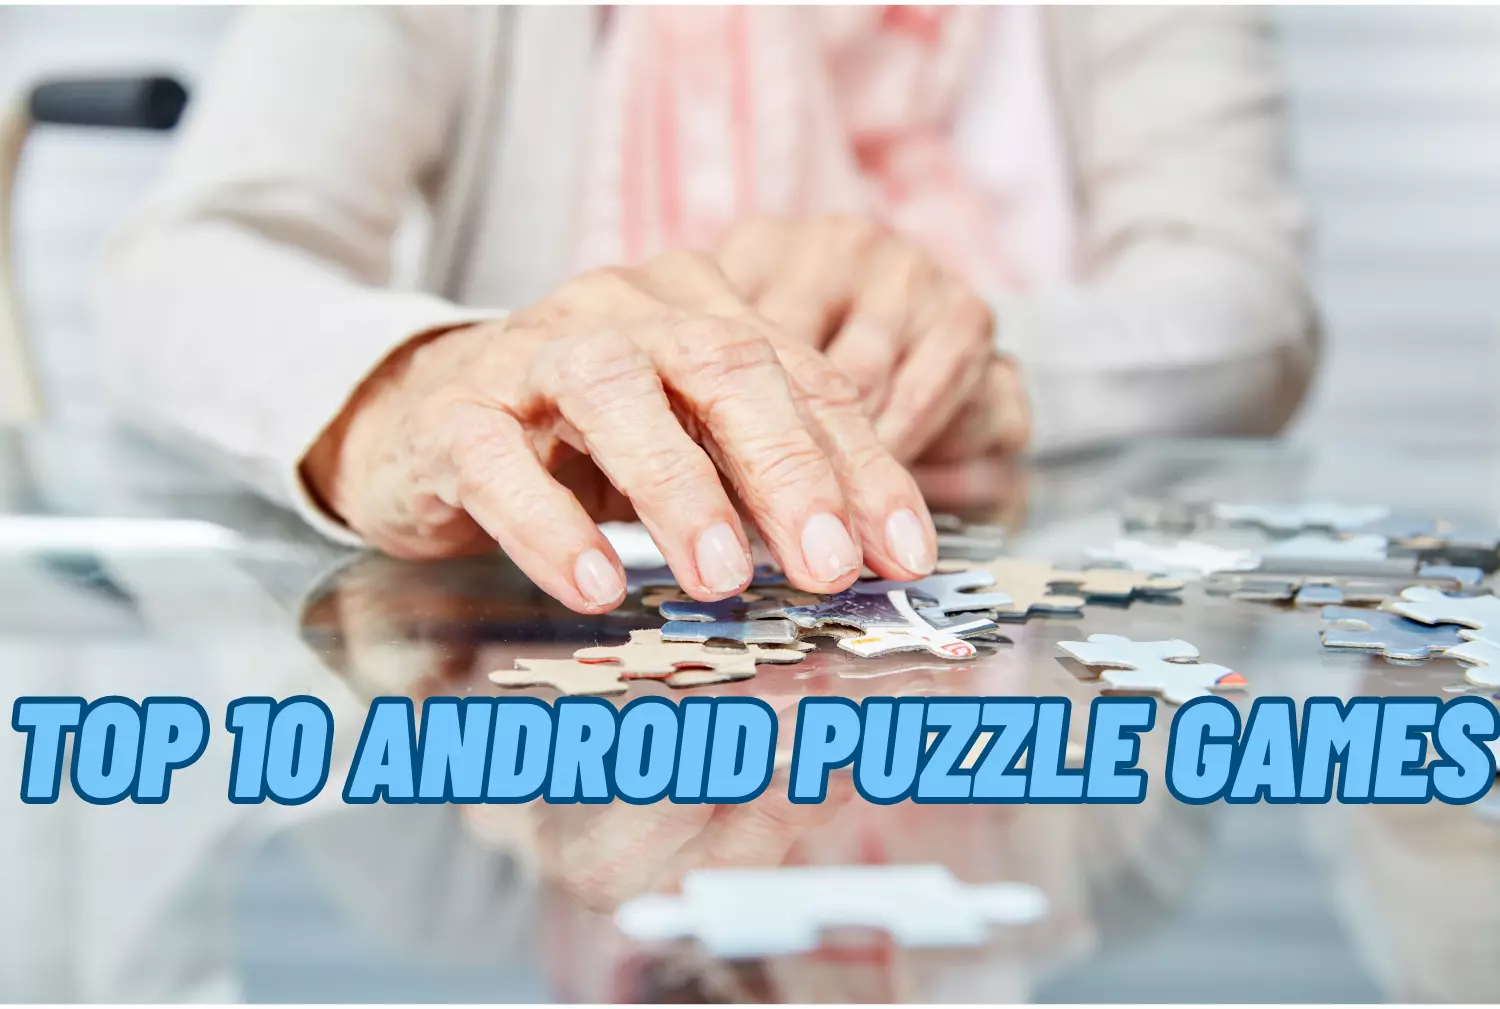 Top 10 Android Puzzle Games: Engaging Brain Teasers for Fun and Relaxation